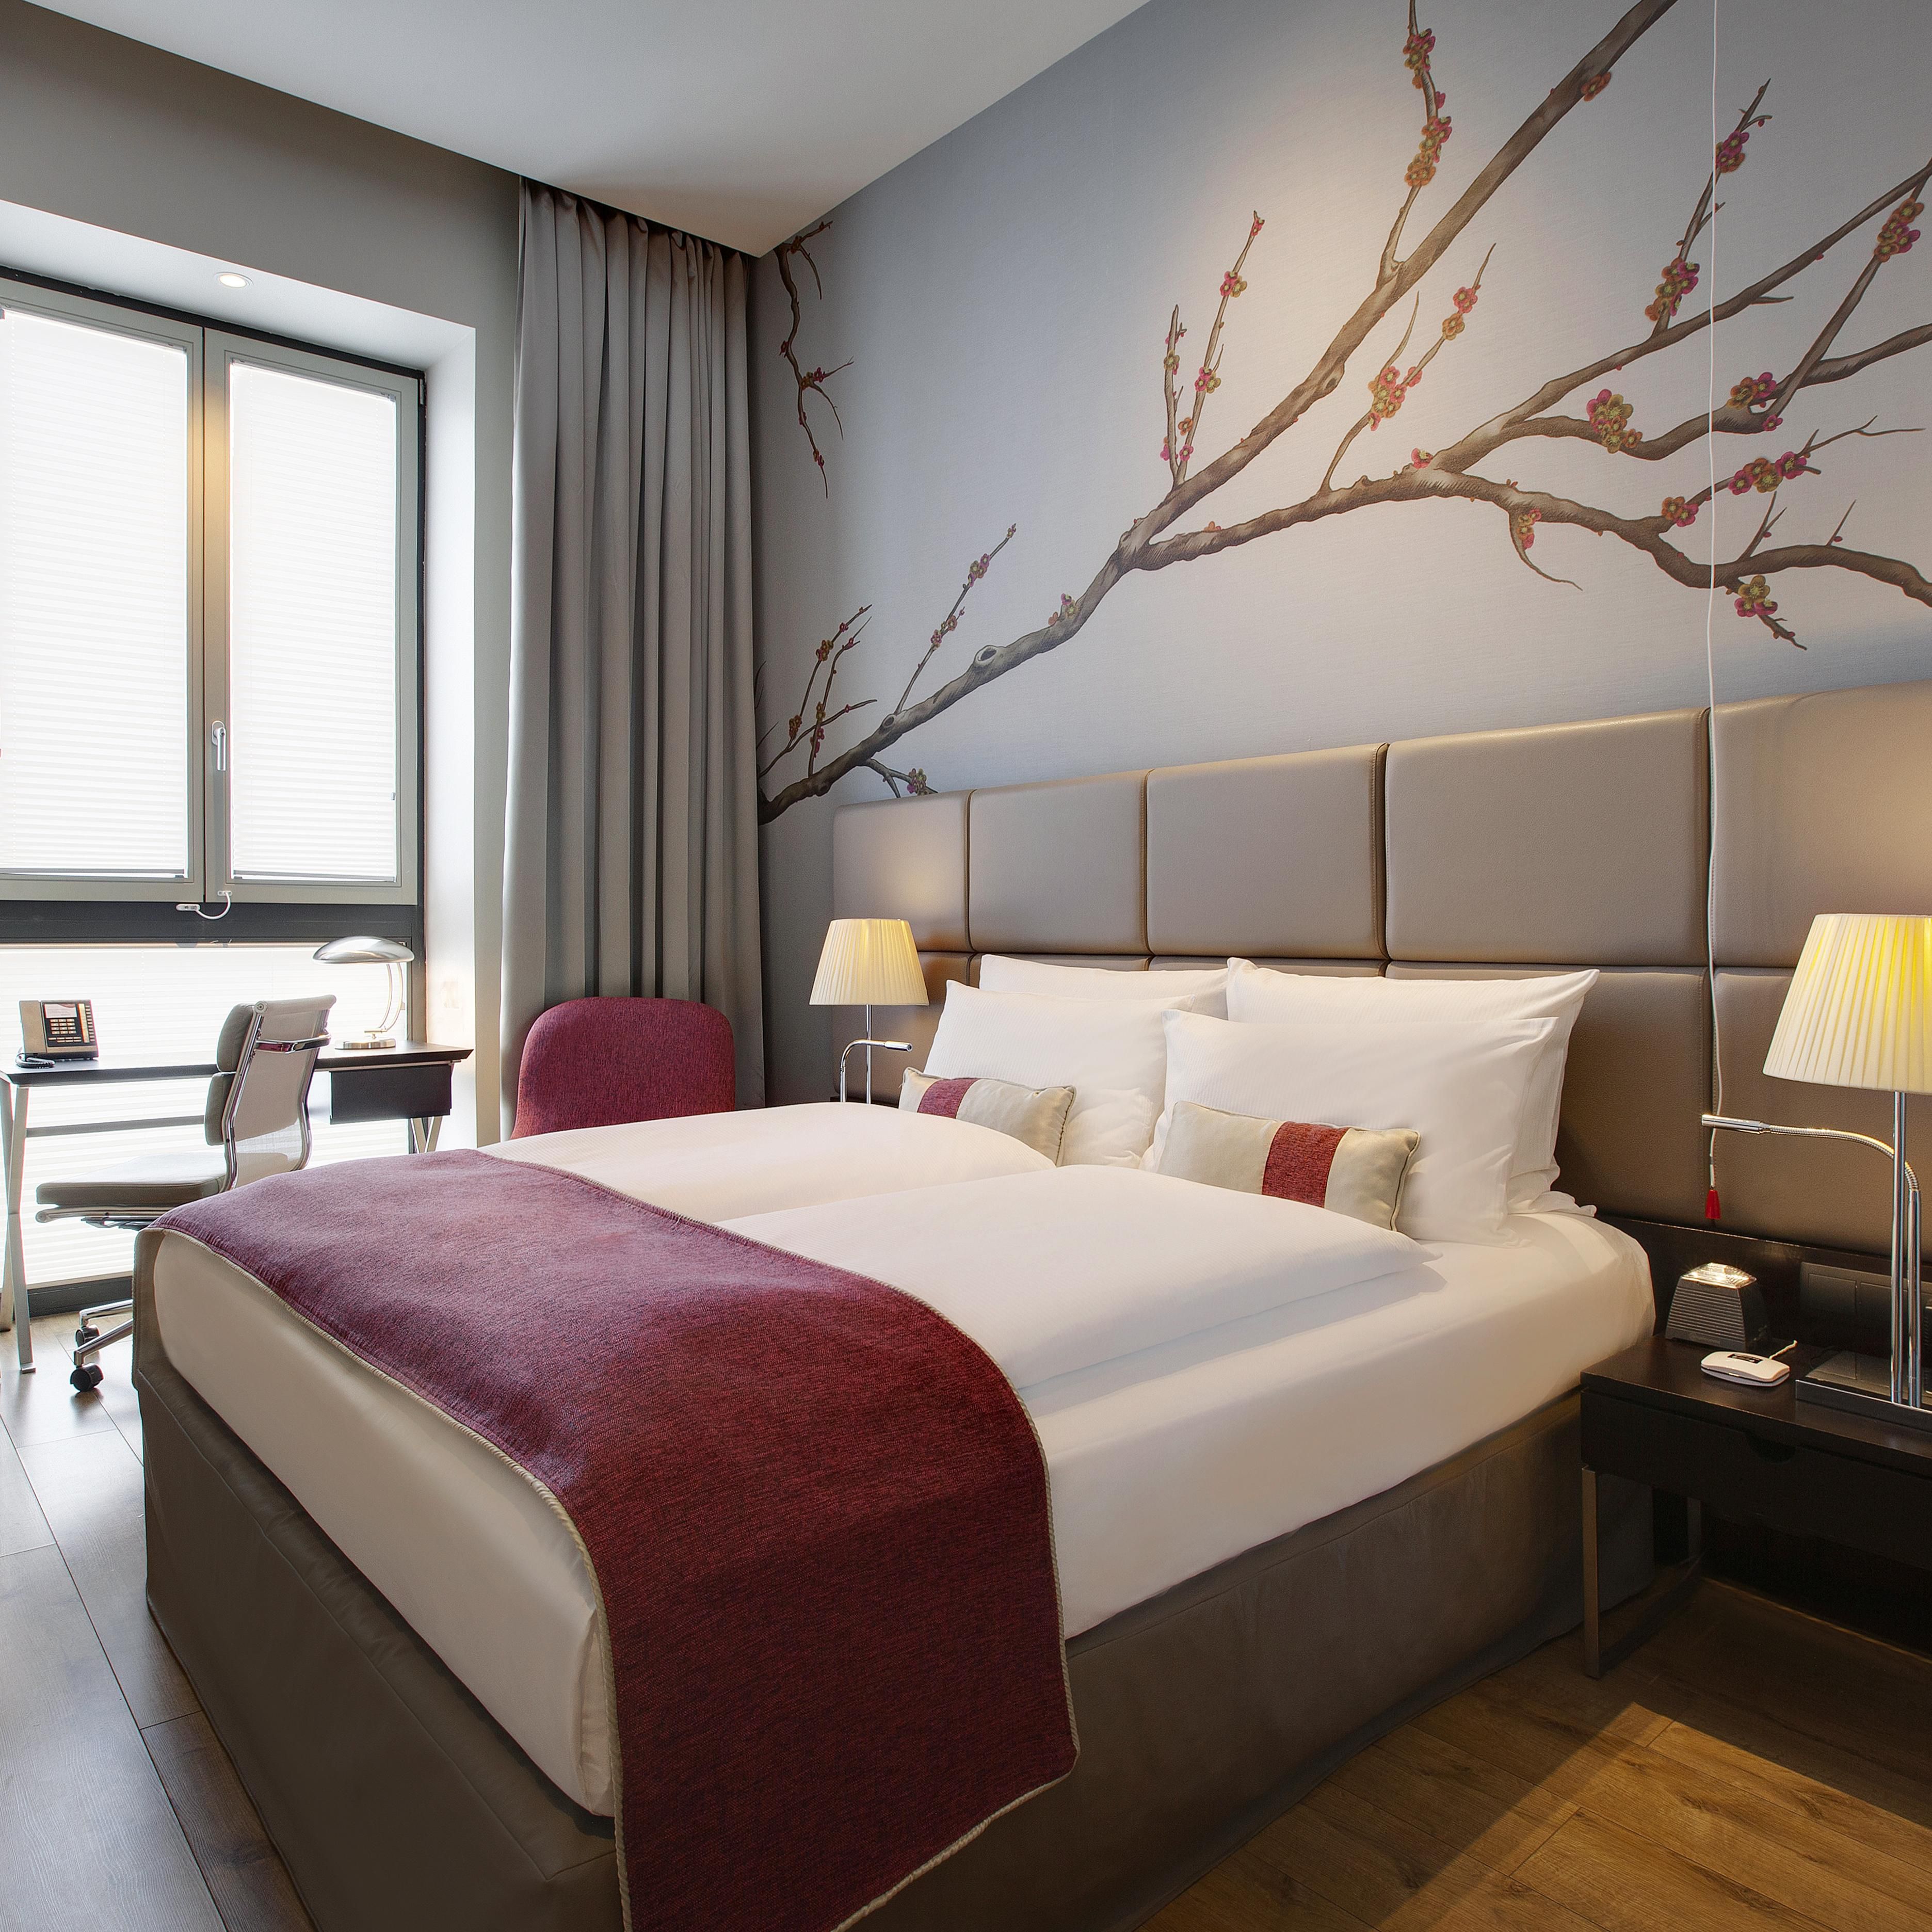 A Crowne Plaza accessible room with a king bed and lots of space.